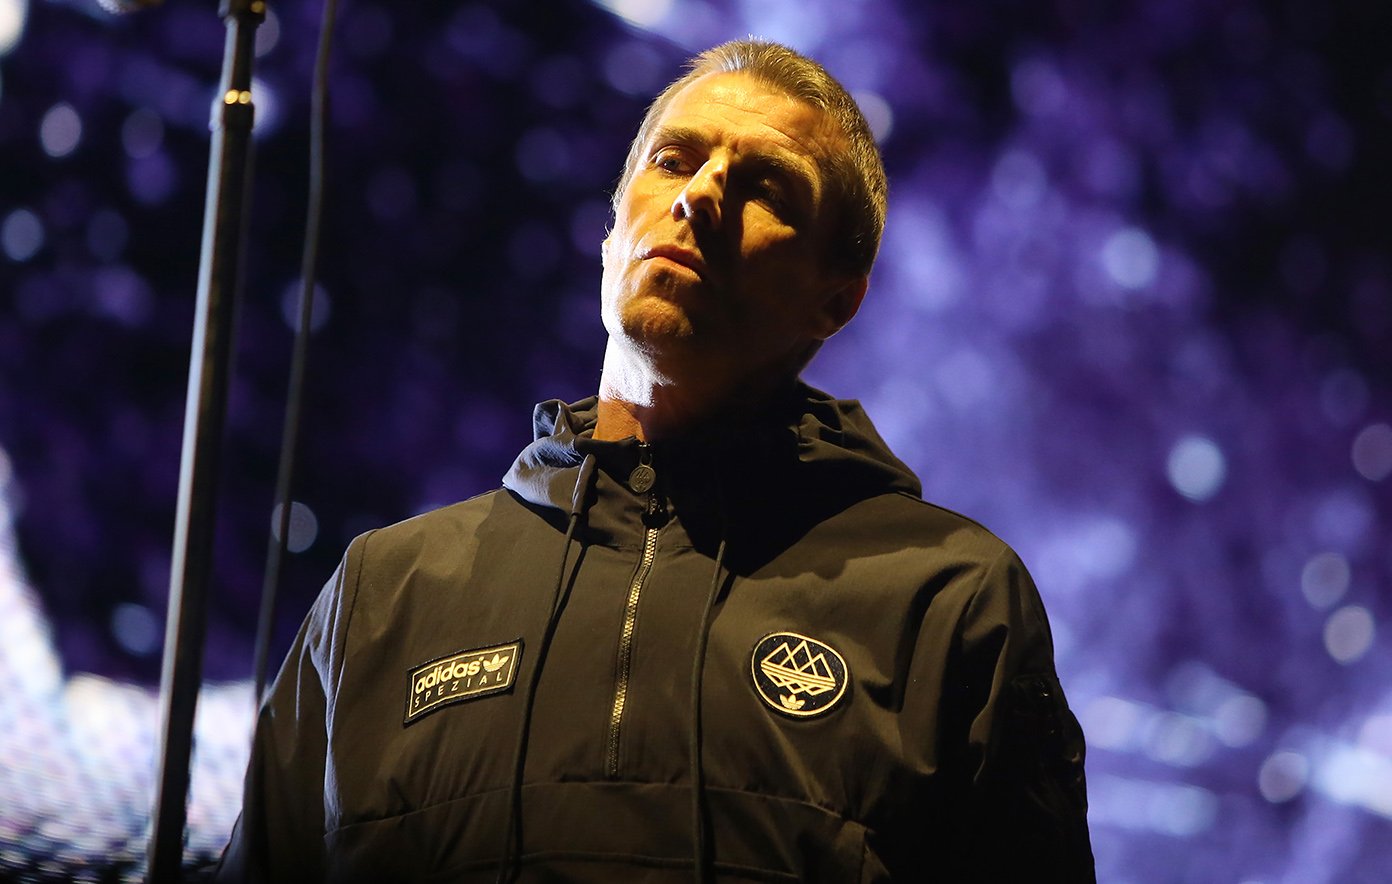 Liam Gallagher clarifies Oasis reunion status following reports about Wembley Stadium plans